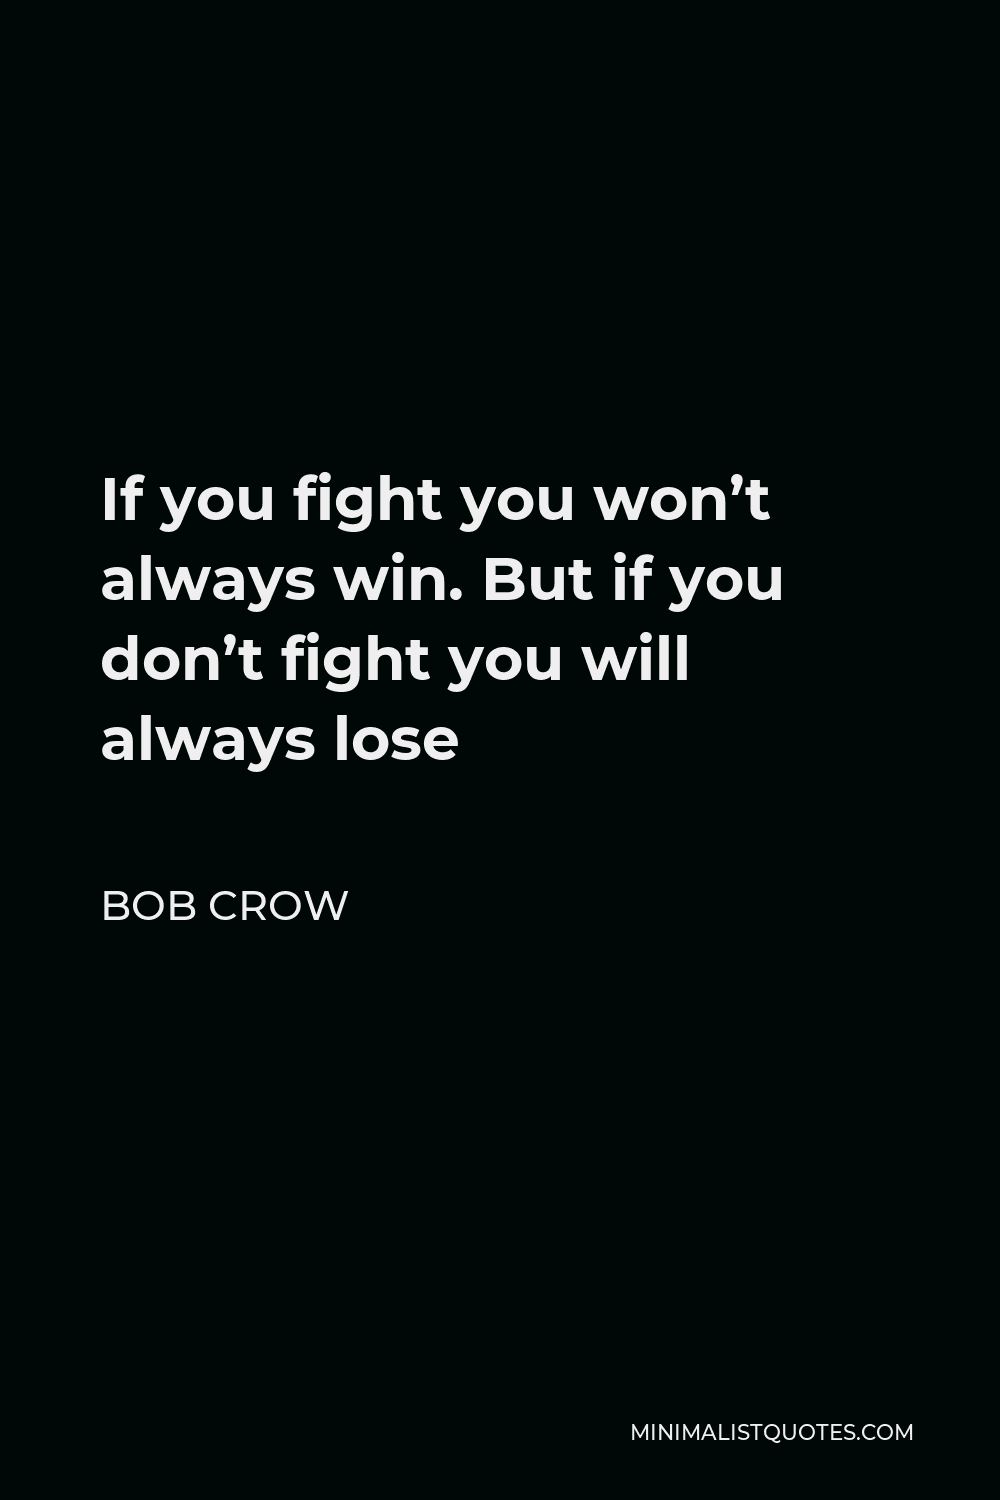 Bob Crow Quote - If you fight you won’t always win. But if you don’t fight you will always lose